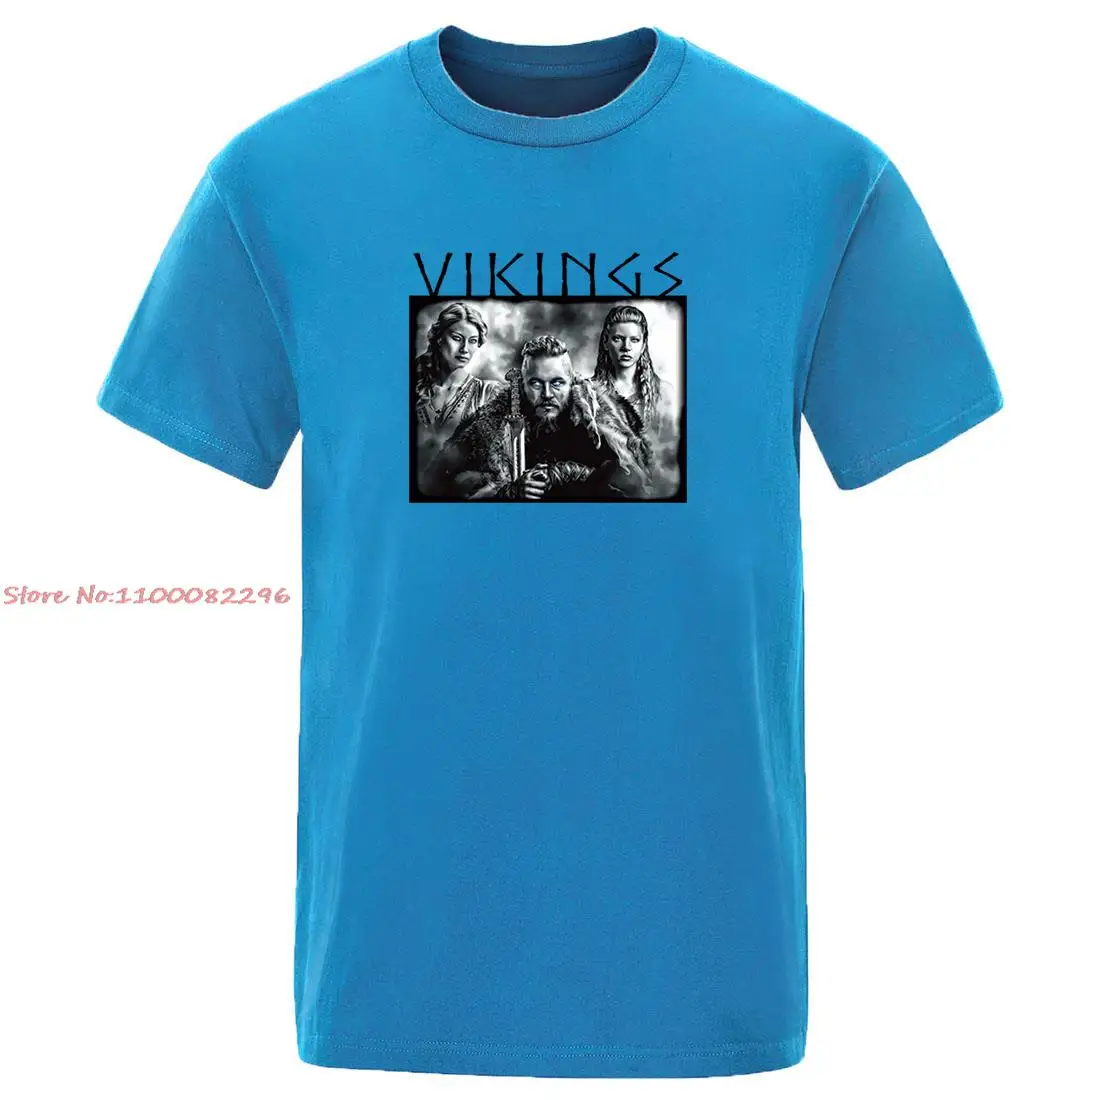 

2022 summer O Neck solid color high quality Tees t-shirts Mans short Sleeve Historical Action Movie Vikings Vintage Print